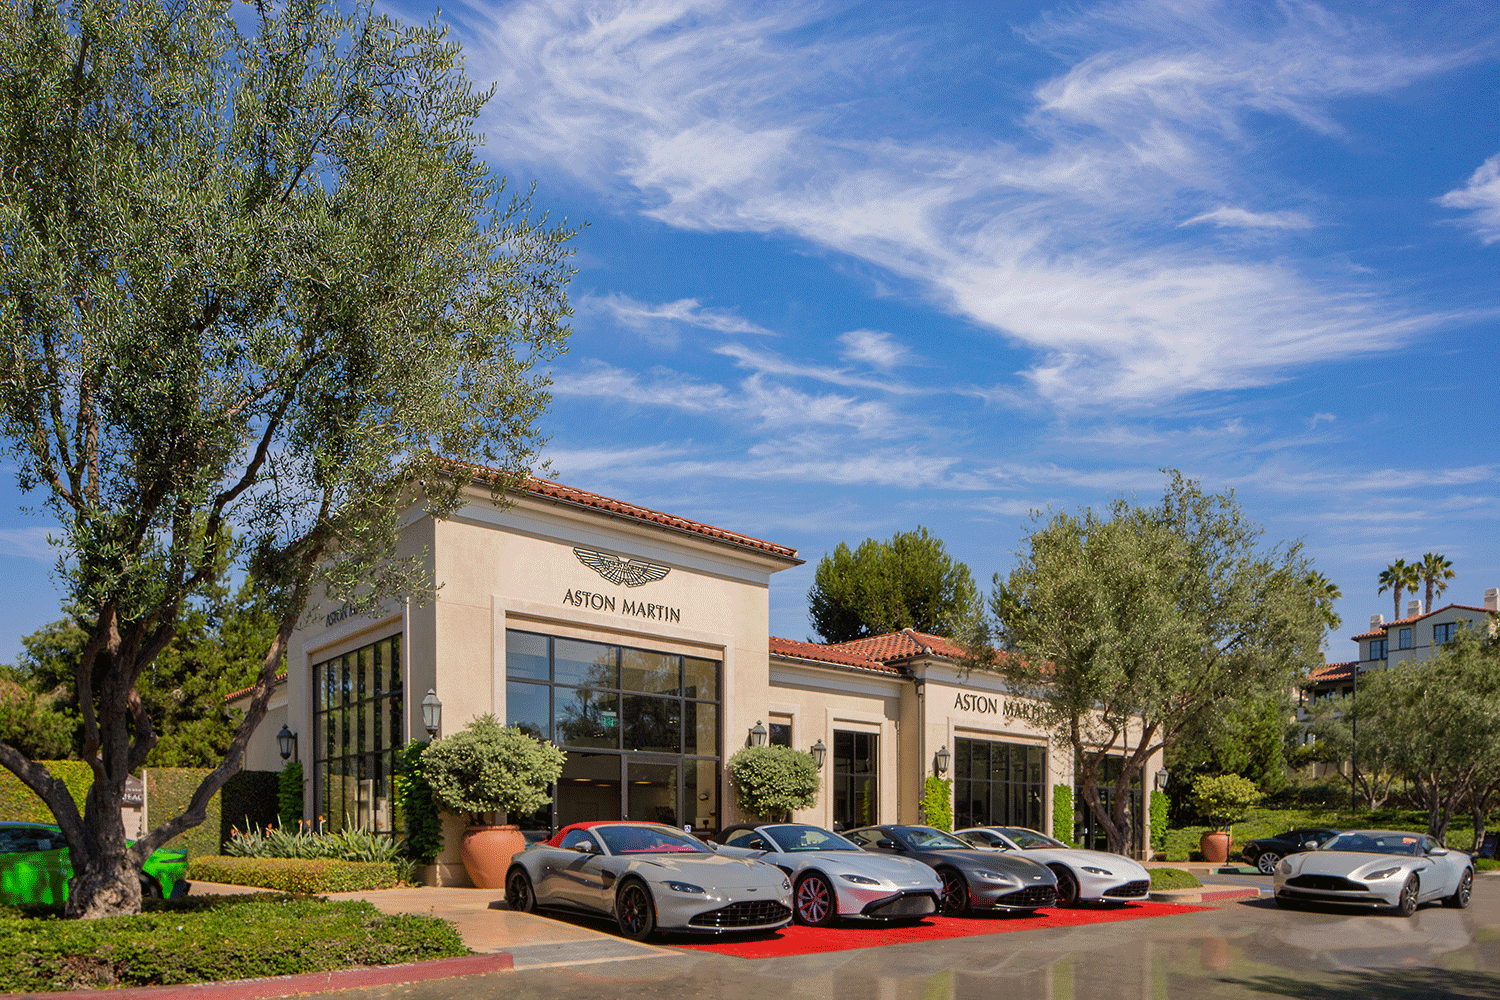  Exterior view of Aston Martin at Crystal Cove Shopping Center